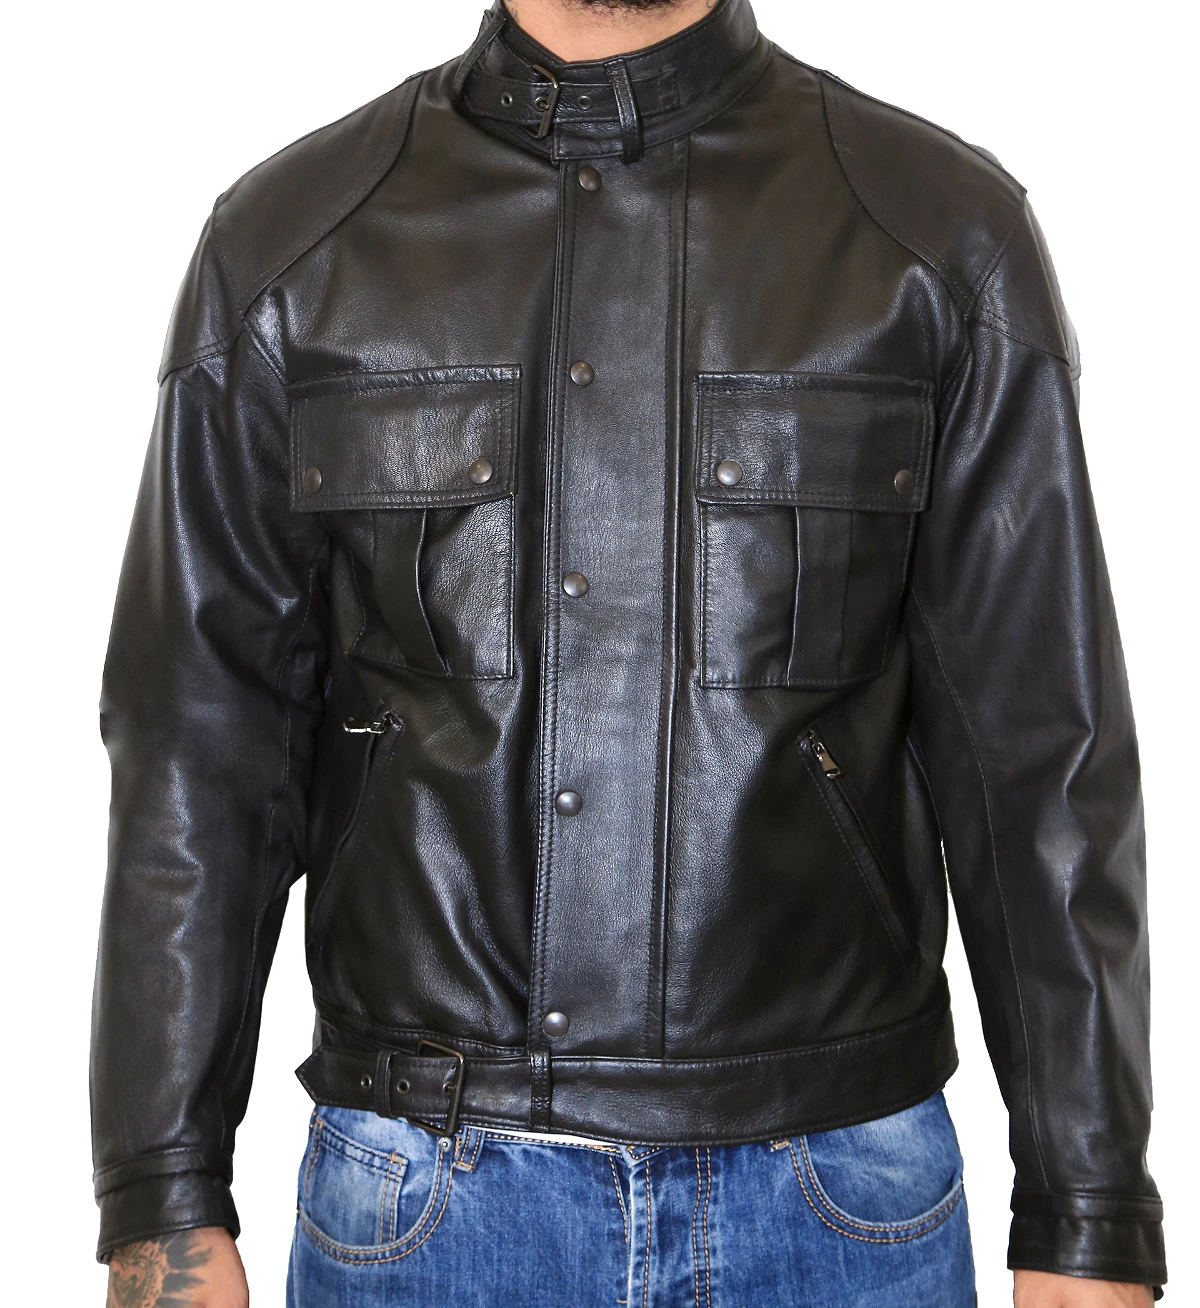 Made In Italy - Men's Leather Jacket In Genuine Leather - English ...